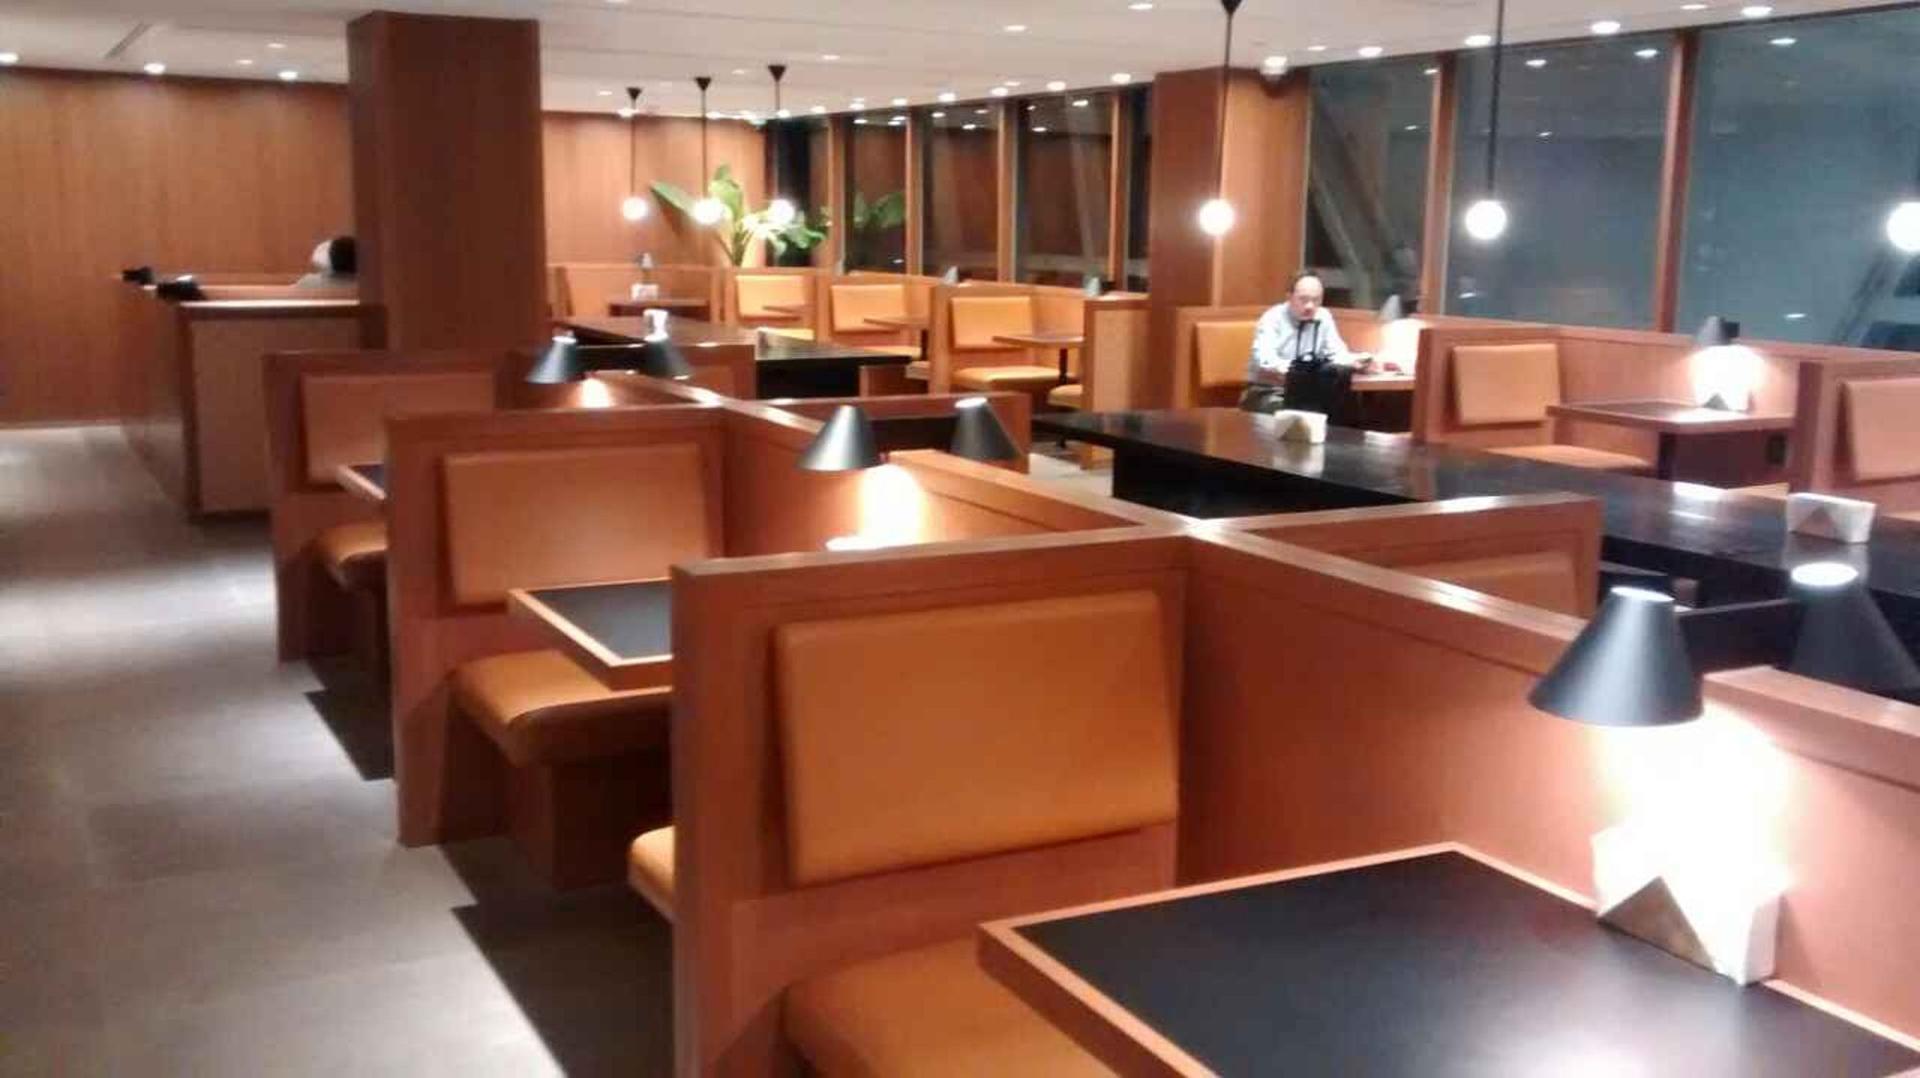 Cathay Pacific First and Business Class Lounge image 21 of 69